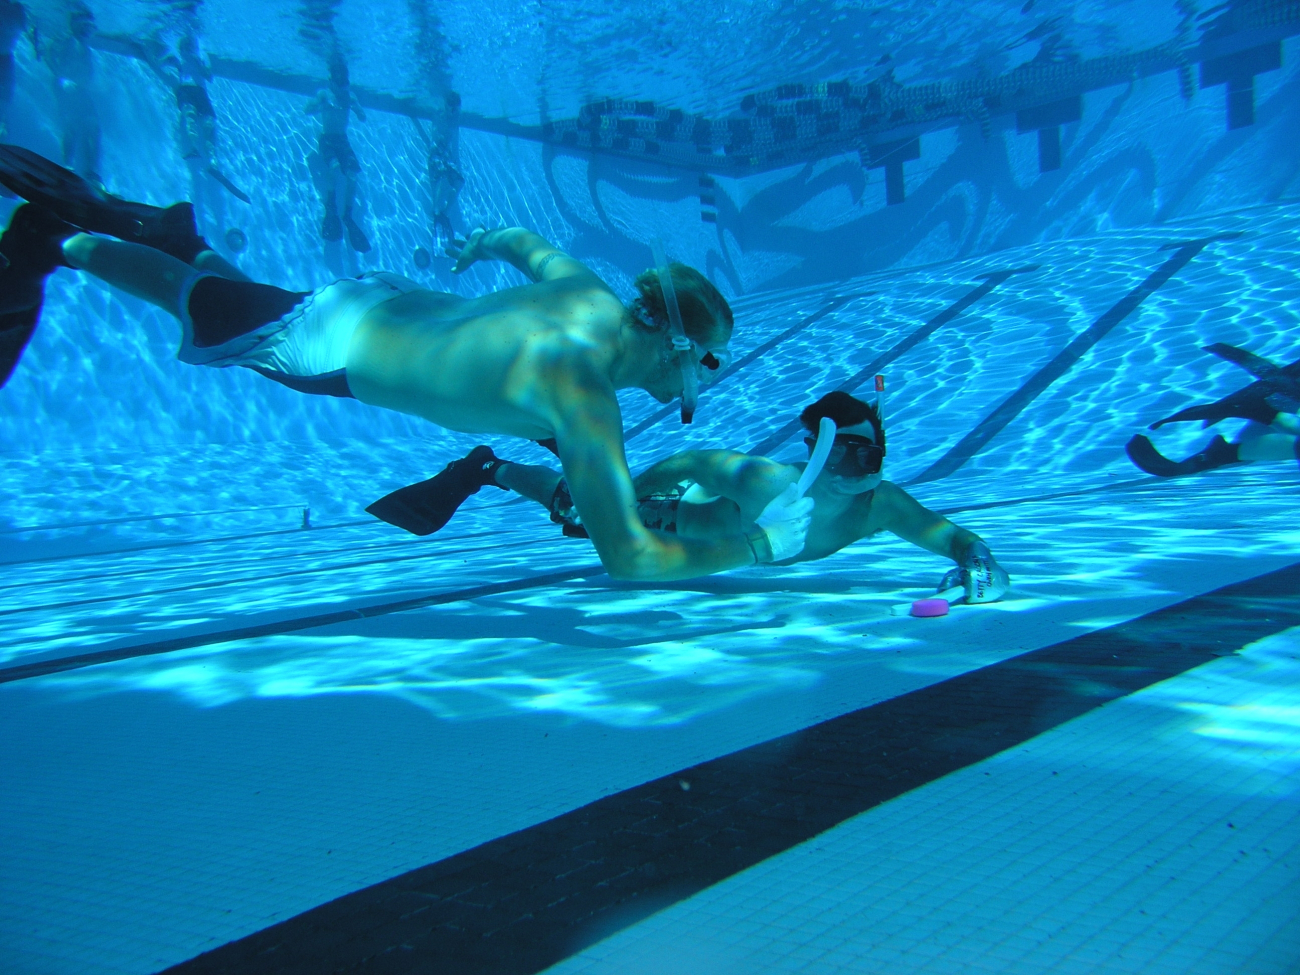 Underwater Hockey is a training routine for NMFS-PIFSC Debris Divers tobuild teamwork and breathe hold capability